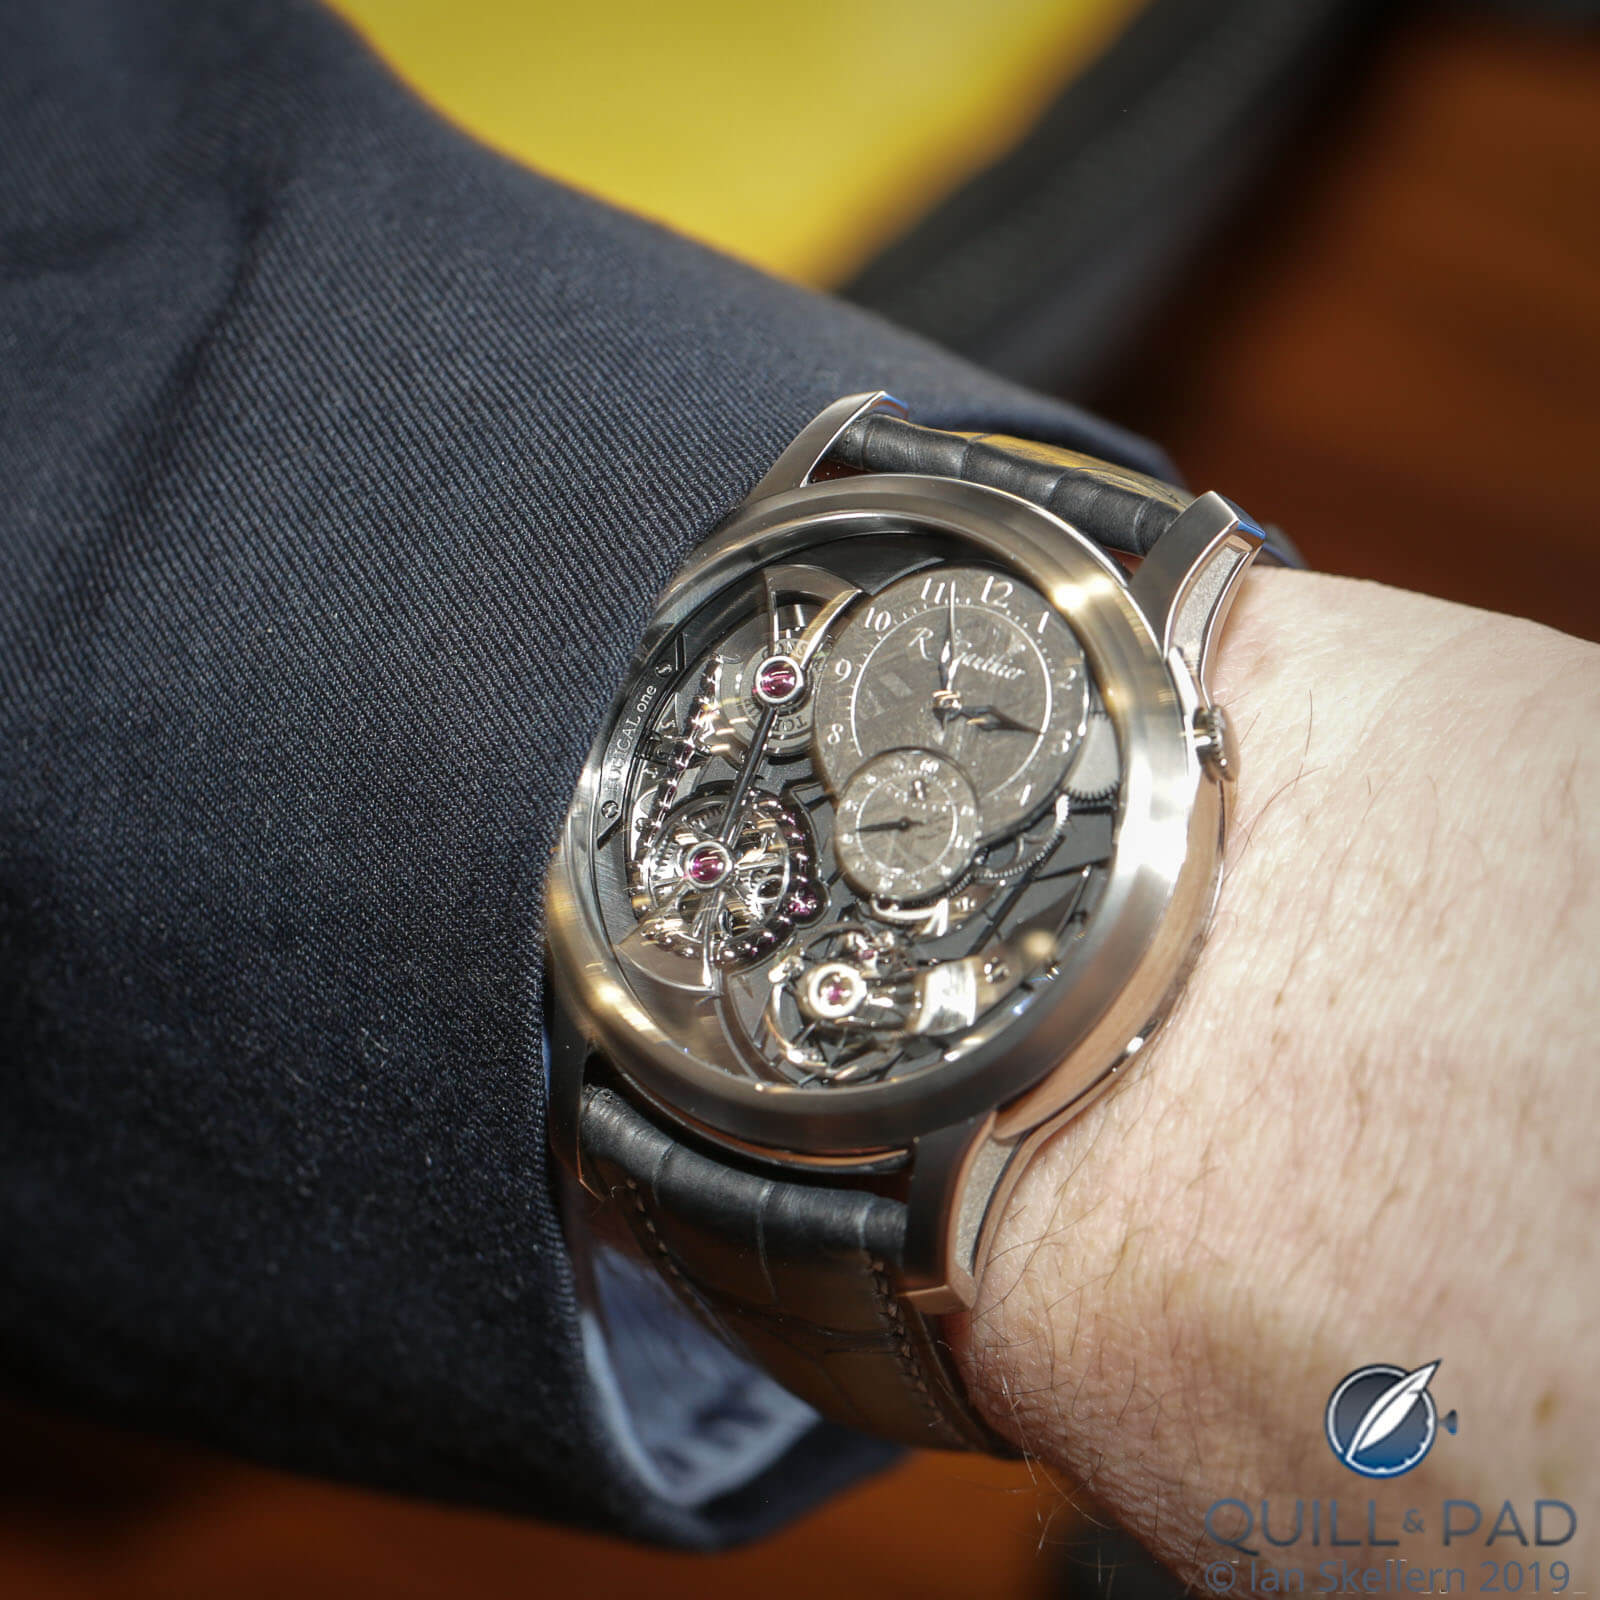 Romain Gauthier Logical One with meteorite dials on the wrist